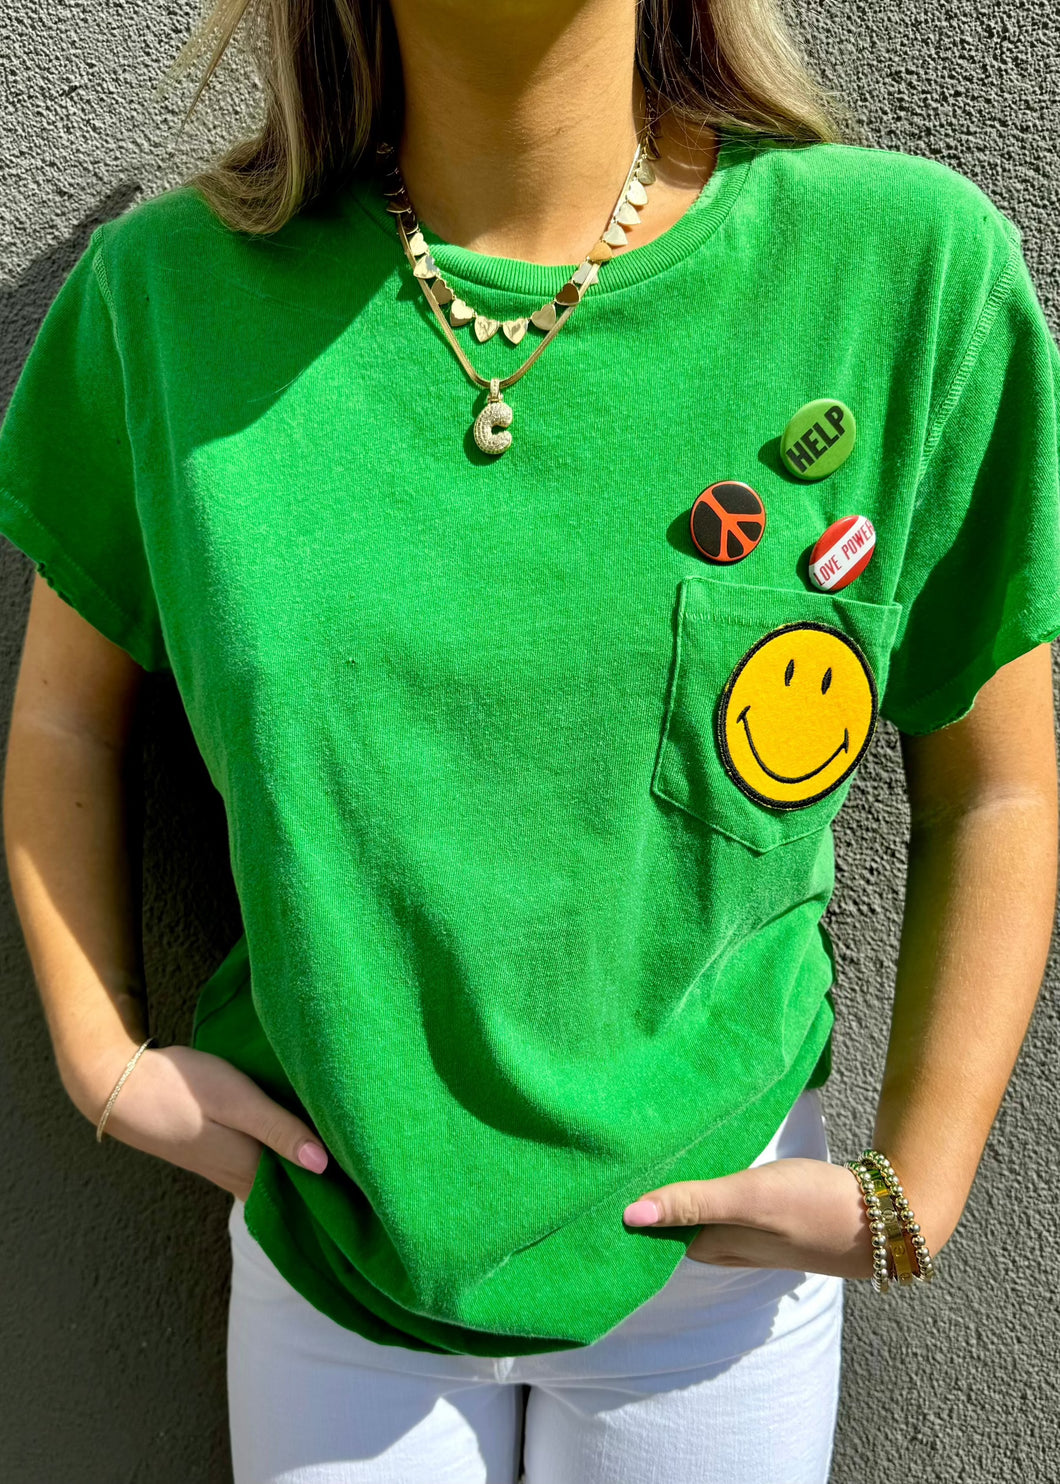 Keep Smiling Tee, available at west2westport.com